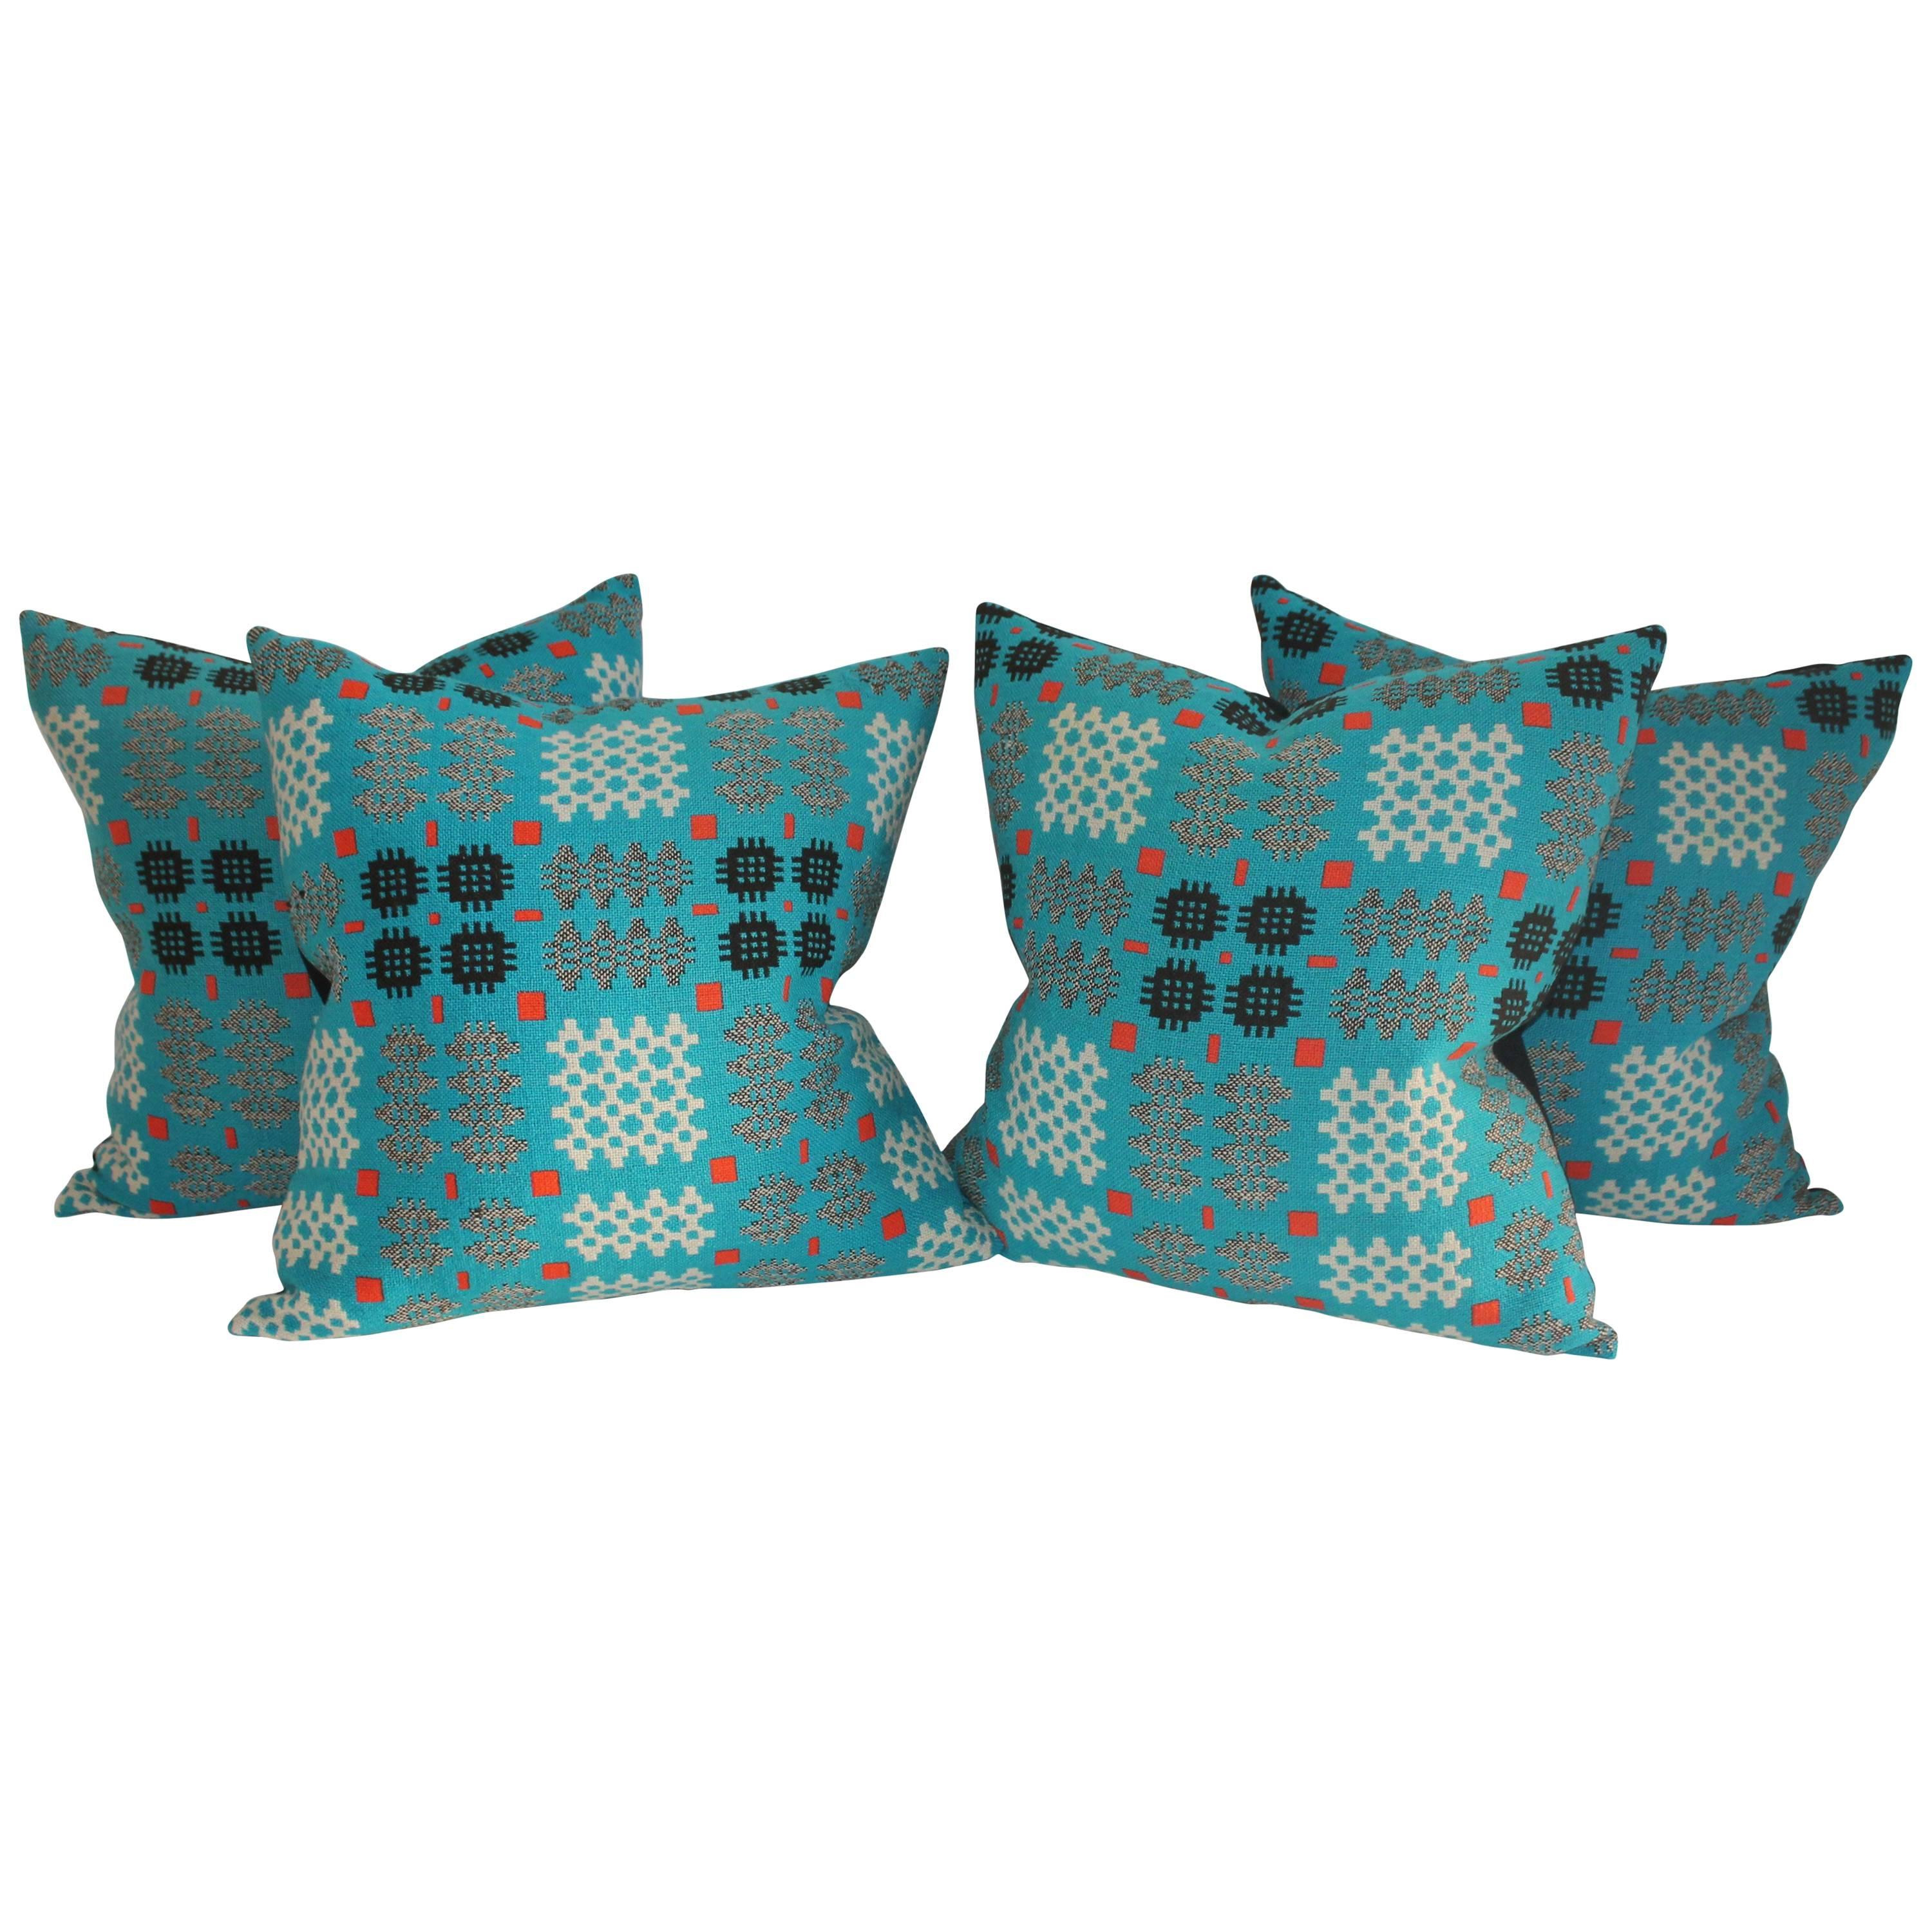 Pair of Woven Jacquard Coverlet Pillows